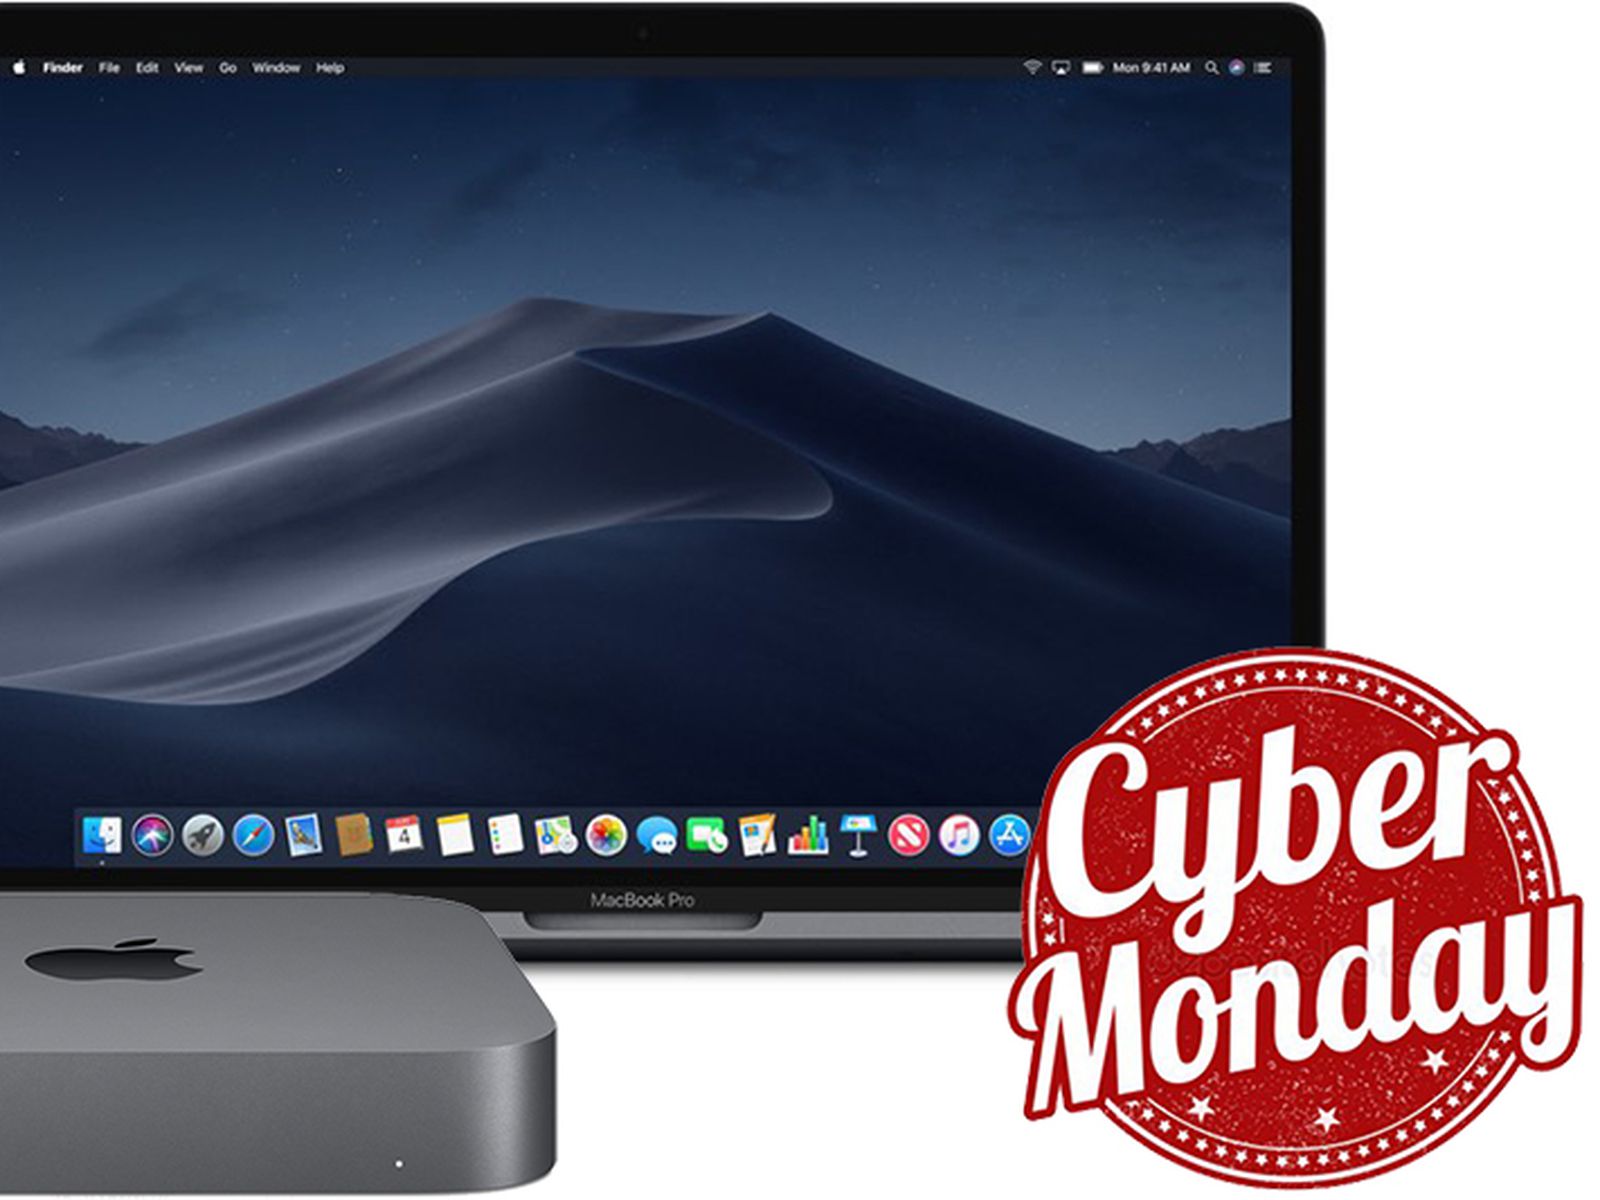 Better Than Black Friday: Save Up to $500 Off 2018 MacBook Pro